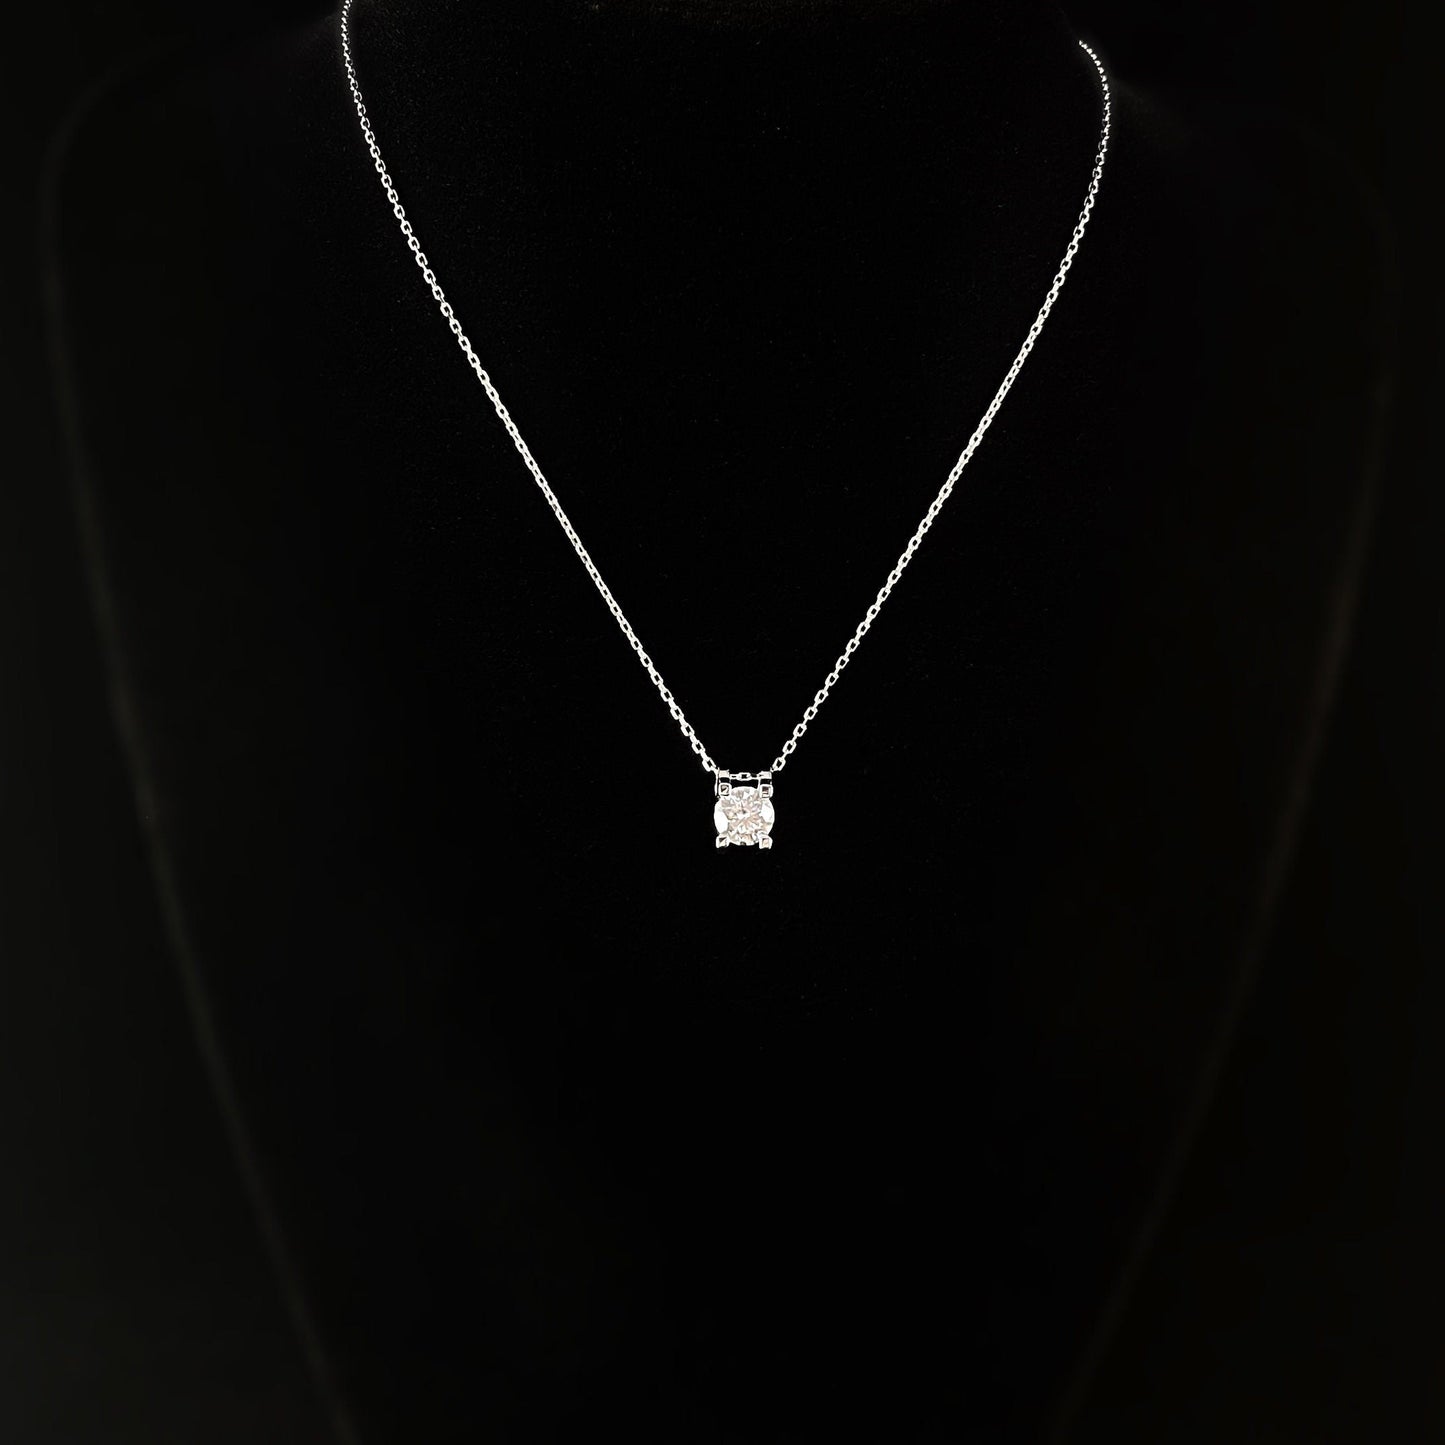 Elegant Dainty Sterling Silver Necklace with Square Crystal Pendant- Genevive